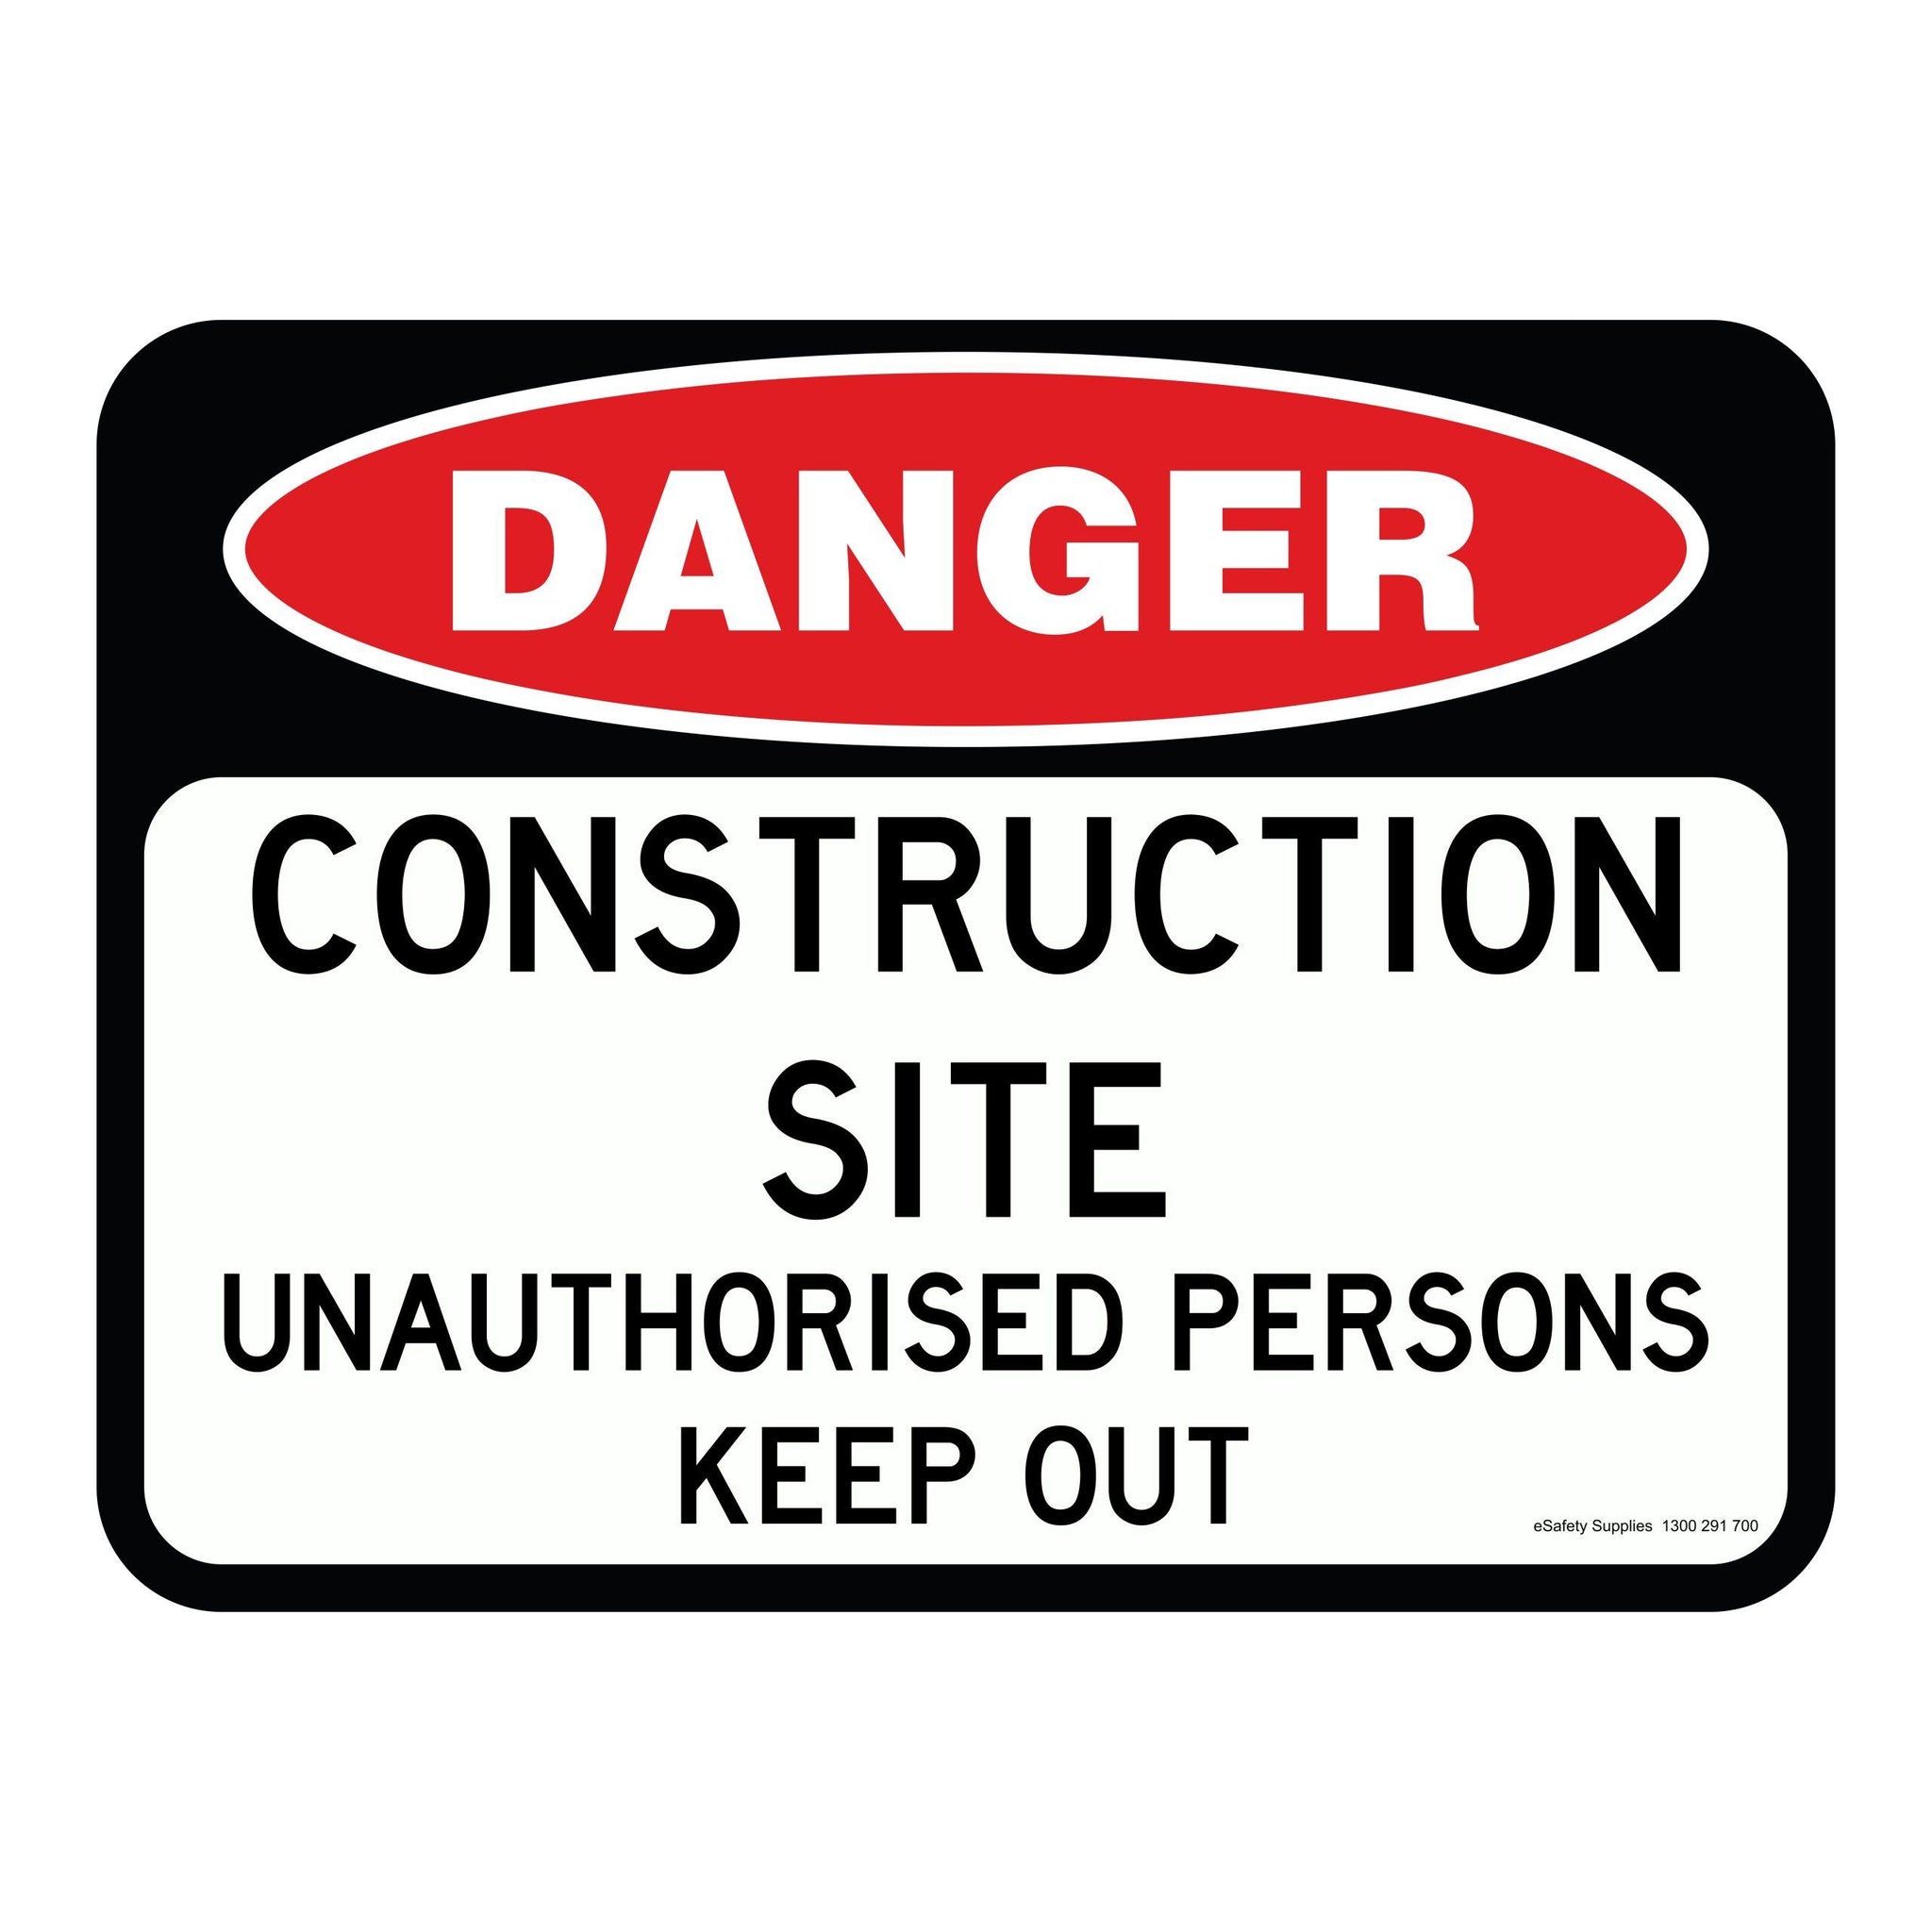 DANGER - CONSTRUCTION SITE UNAUTHORISED PERSONS KEEP OUT (1)